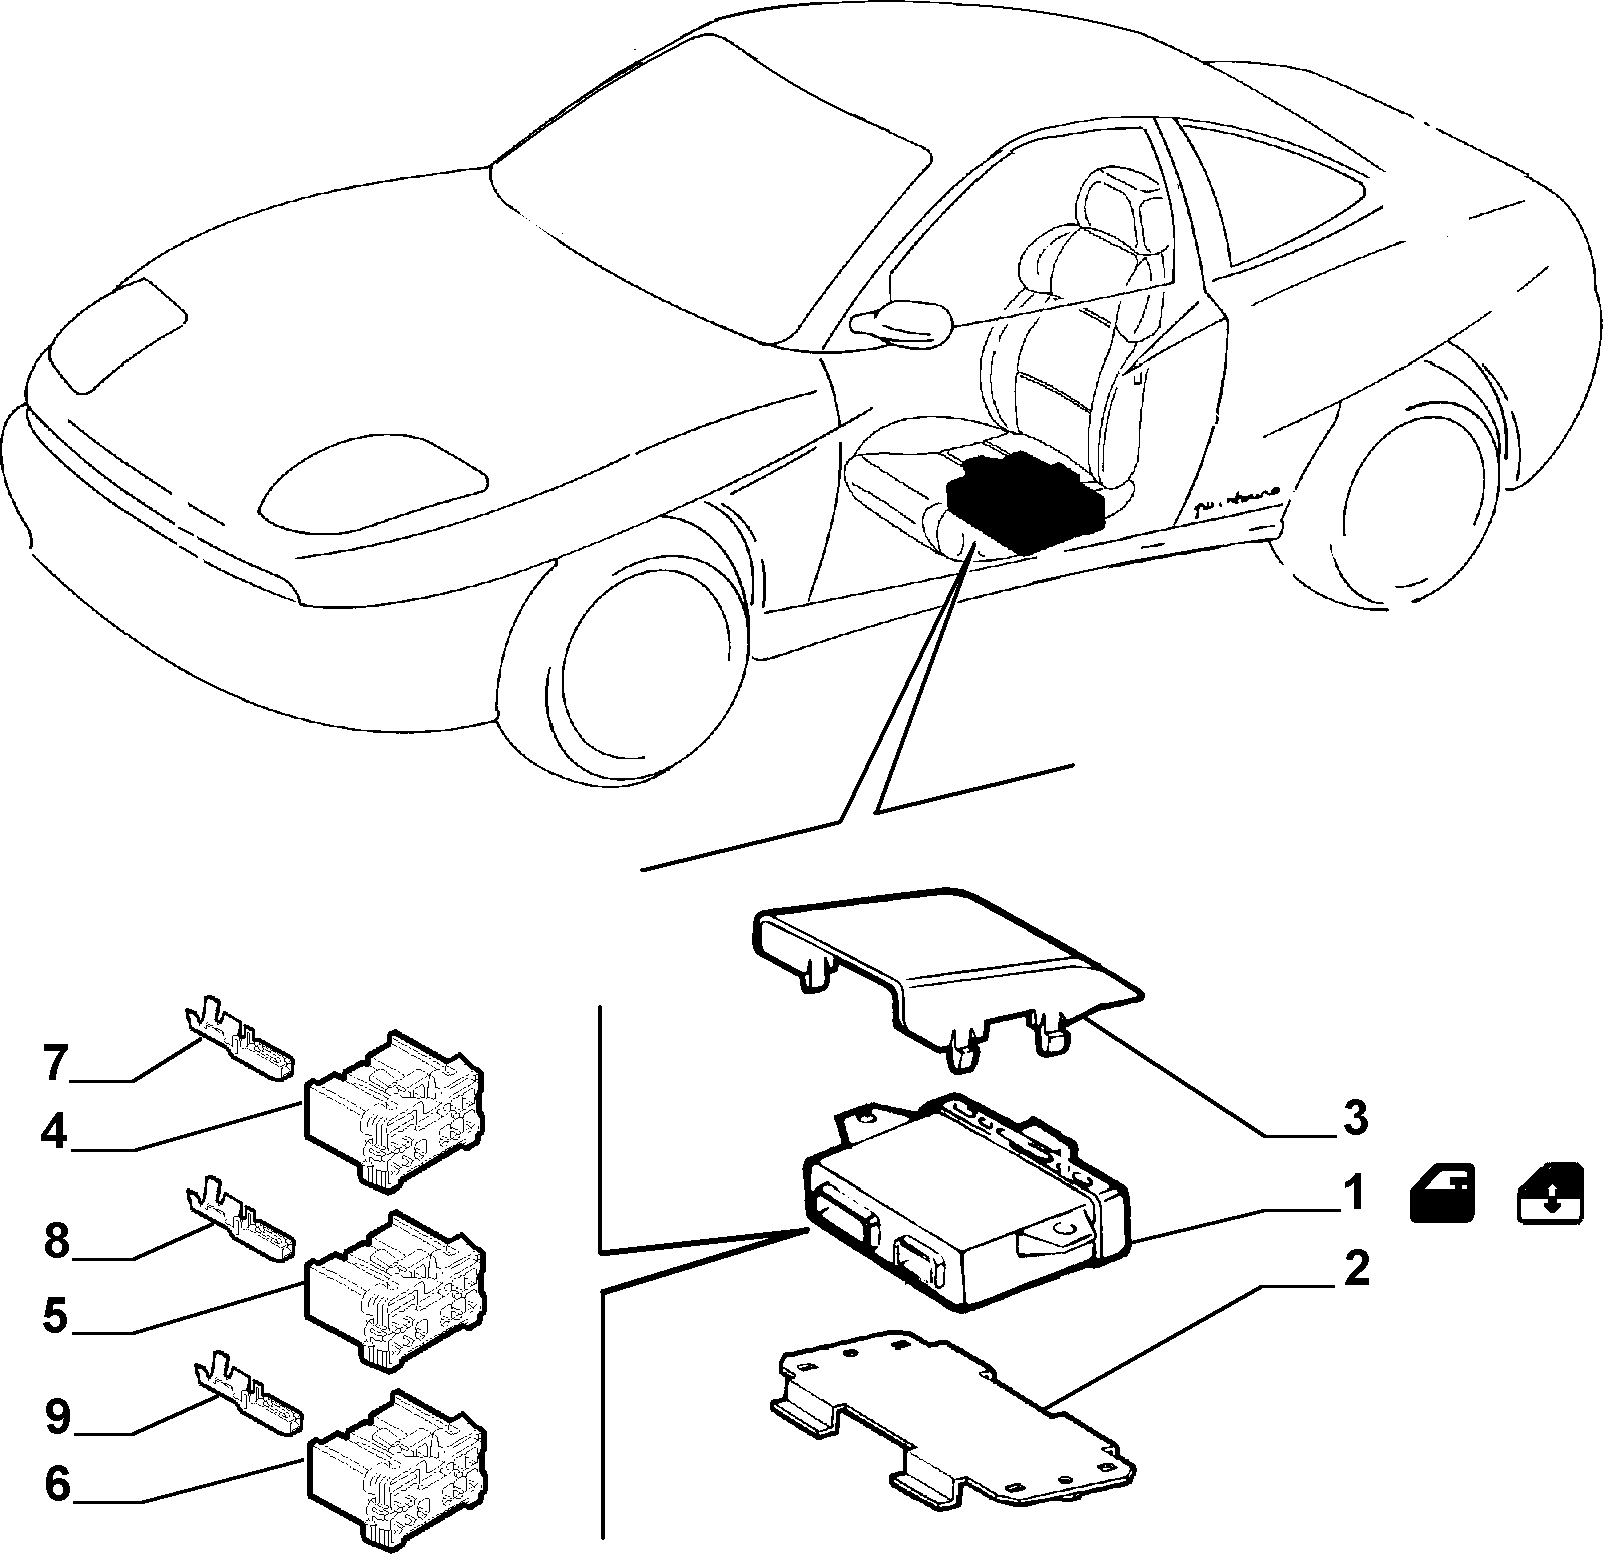 INTERCONNECTION AND REMOTE CONTROL SWITCH pour Fiat COUPE COUPE' GAMMA'96 (1996 - 2000)